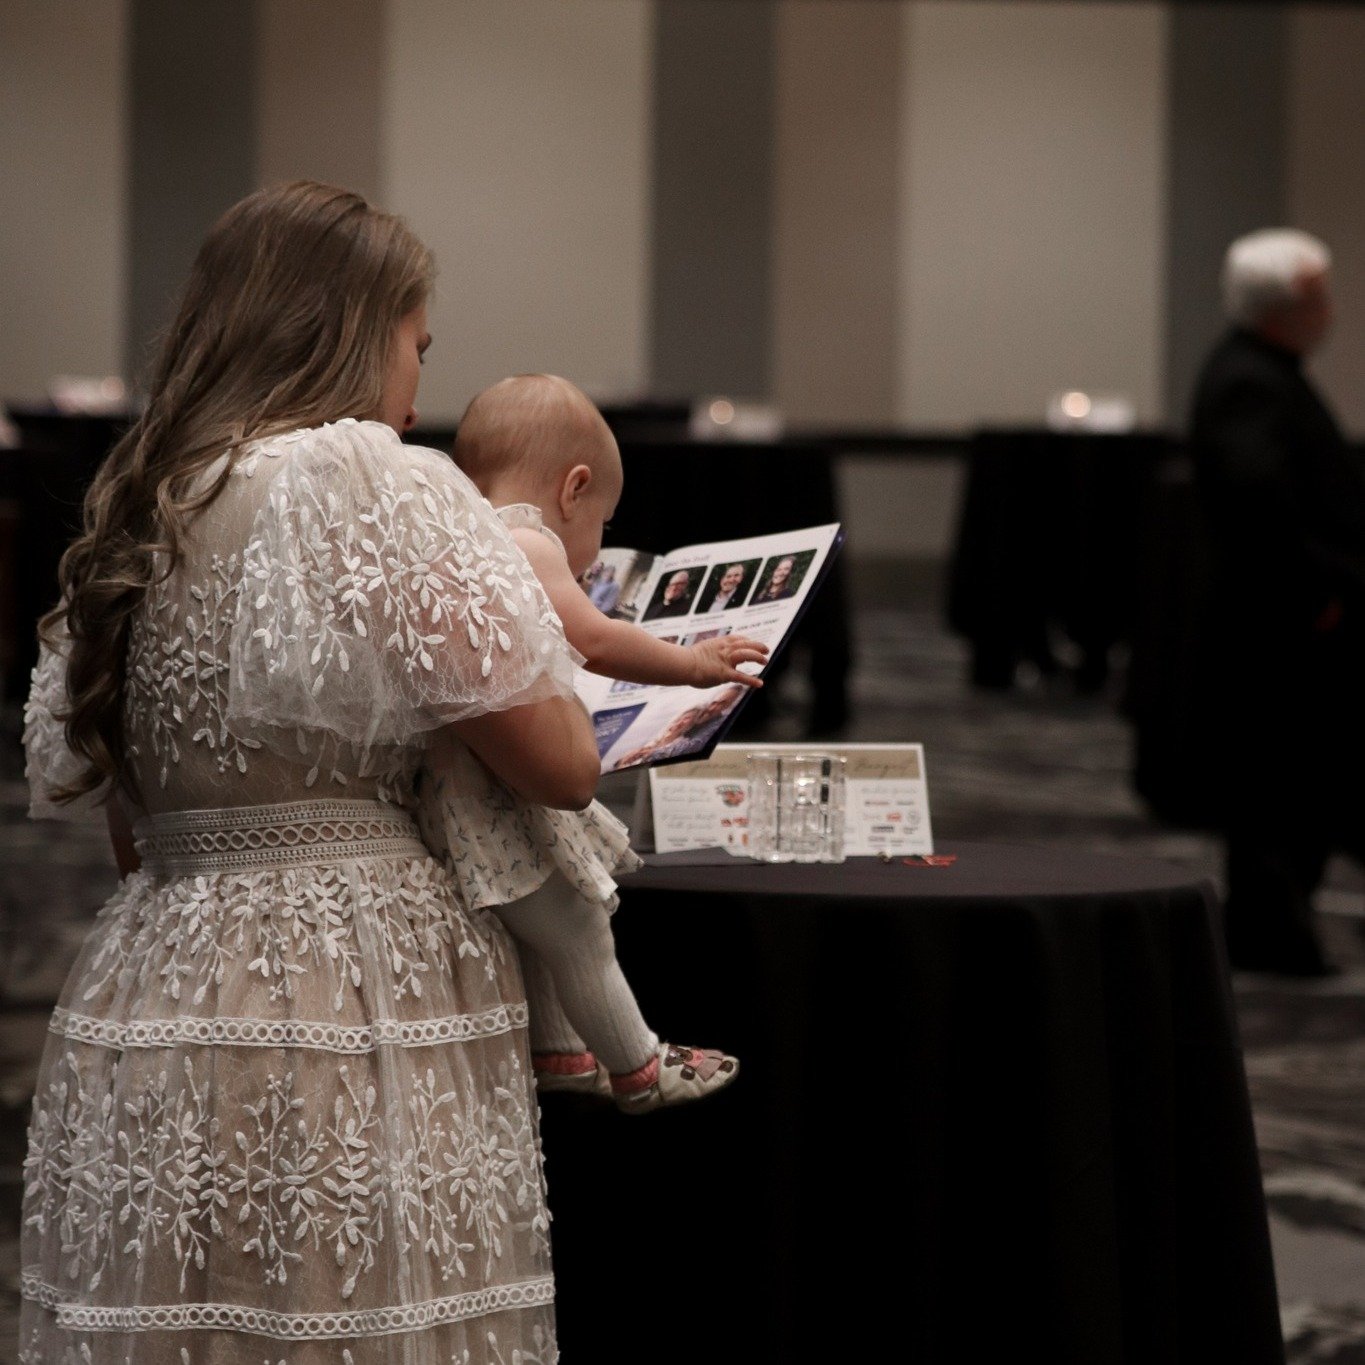 OH BABY! There were a lot of little ones at this year's St. Gianna Banquet!

How fitting it was to see the vocation of parenthood being so beautifully exemplified by these mothers and fathers at our banquet named after the patron of mothers herself, 